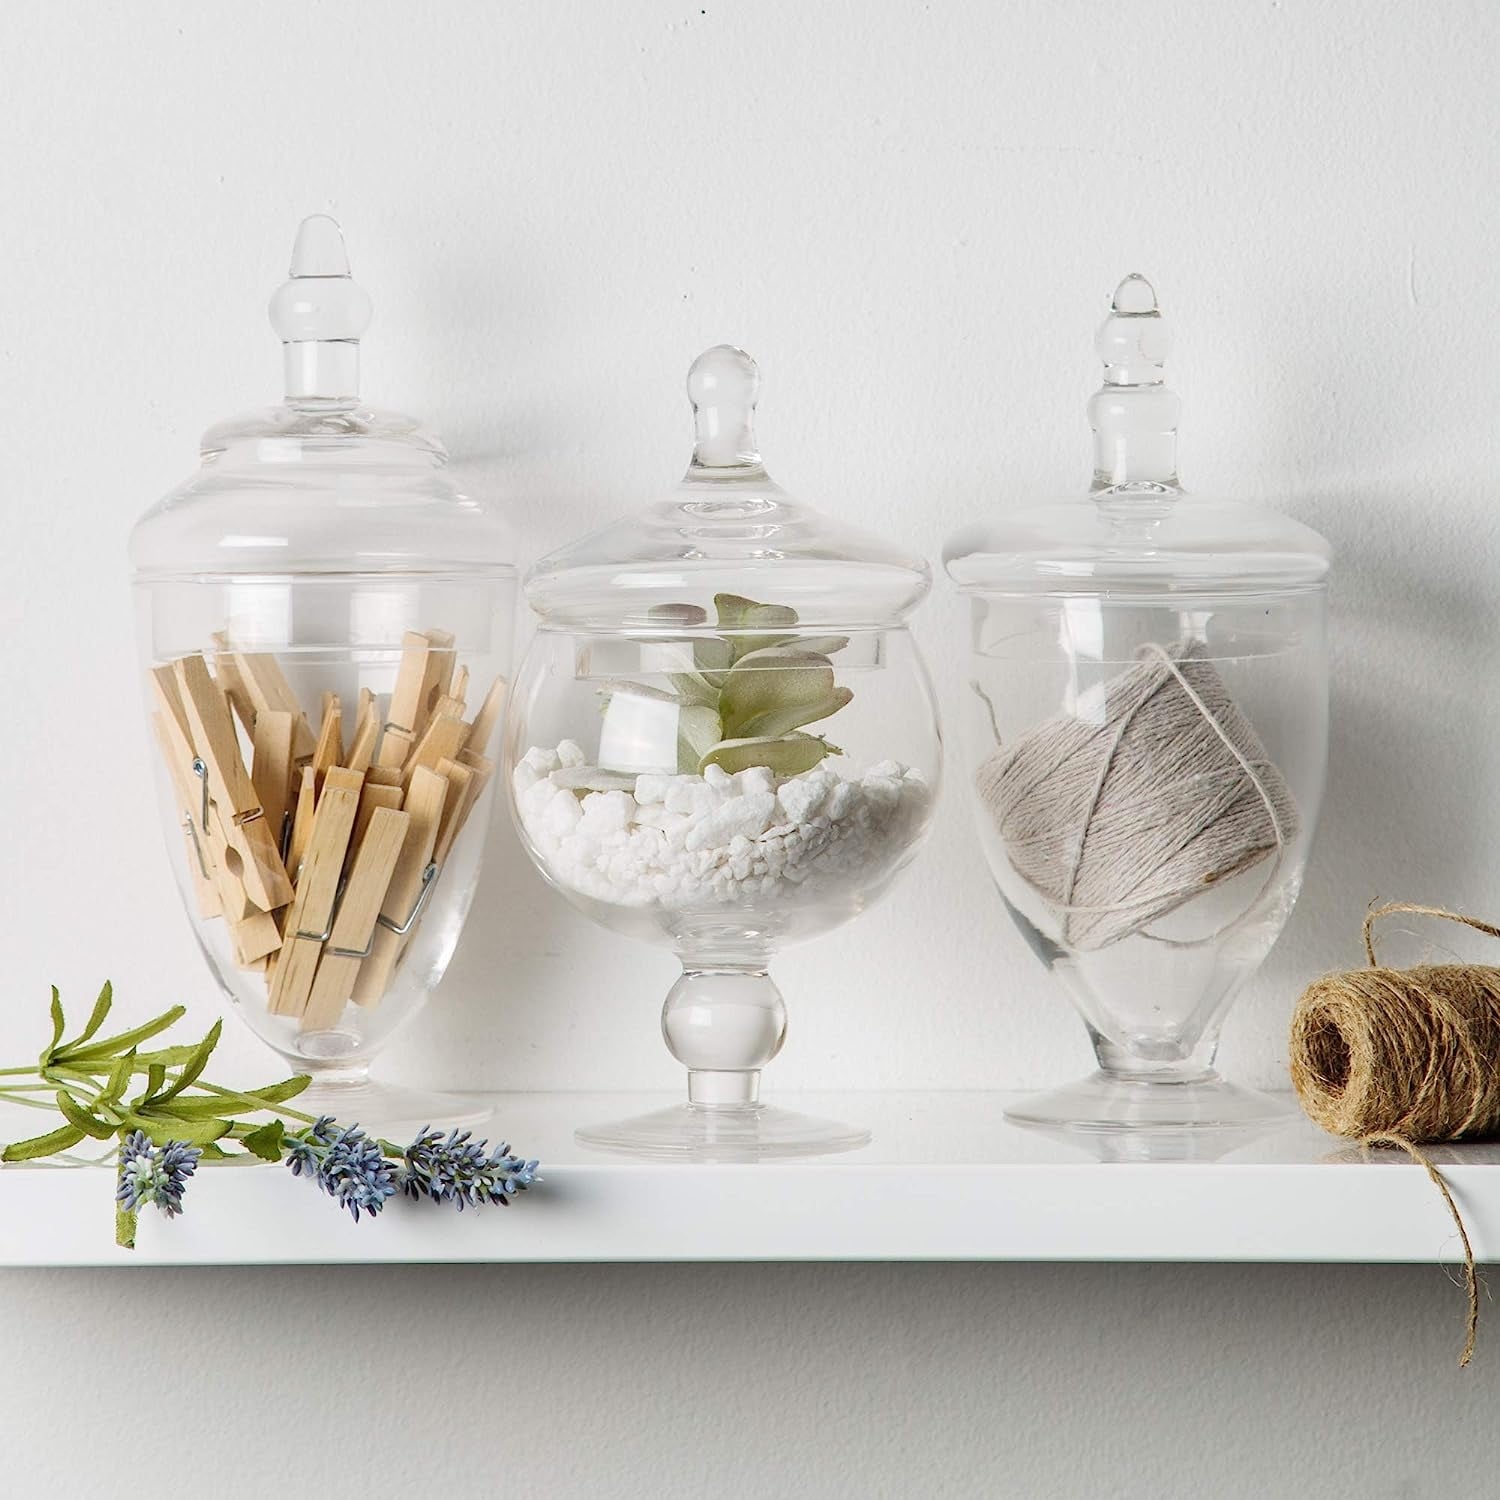 https://ak1.ostkcdn.com/images/products/is/images/direct/2e52f233a9db1a2073058461c2bbad61caa979a6/Palais-Glassware-Clear-Glass-Apothecary-Jars---Set-of-3---Wedding-Candy-Buffet-Containers.jpg